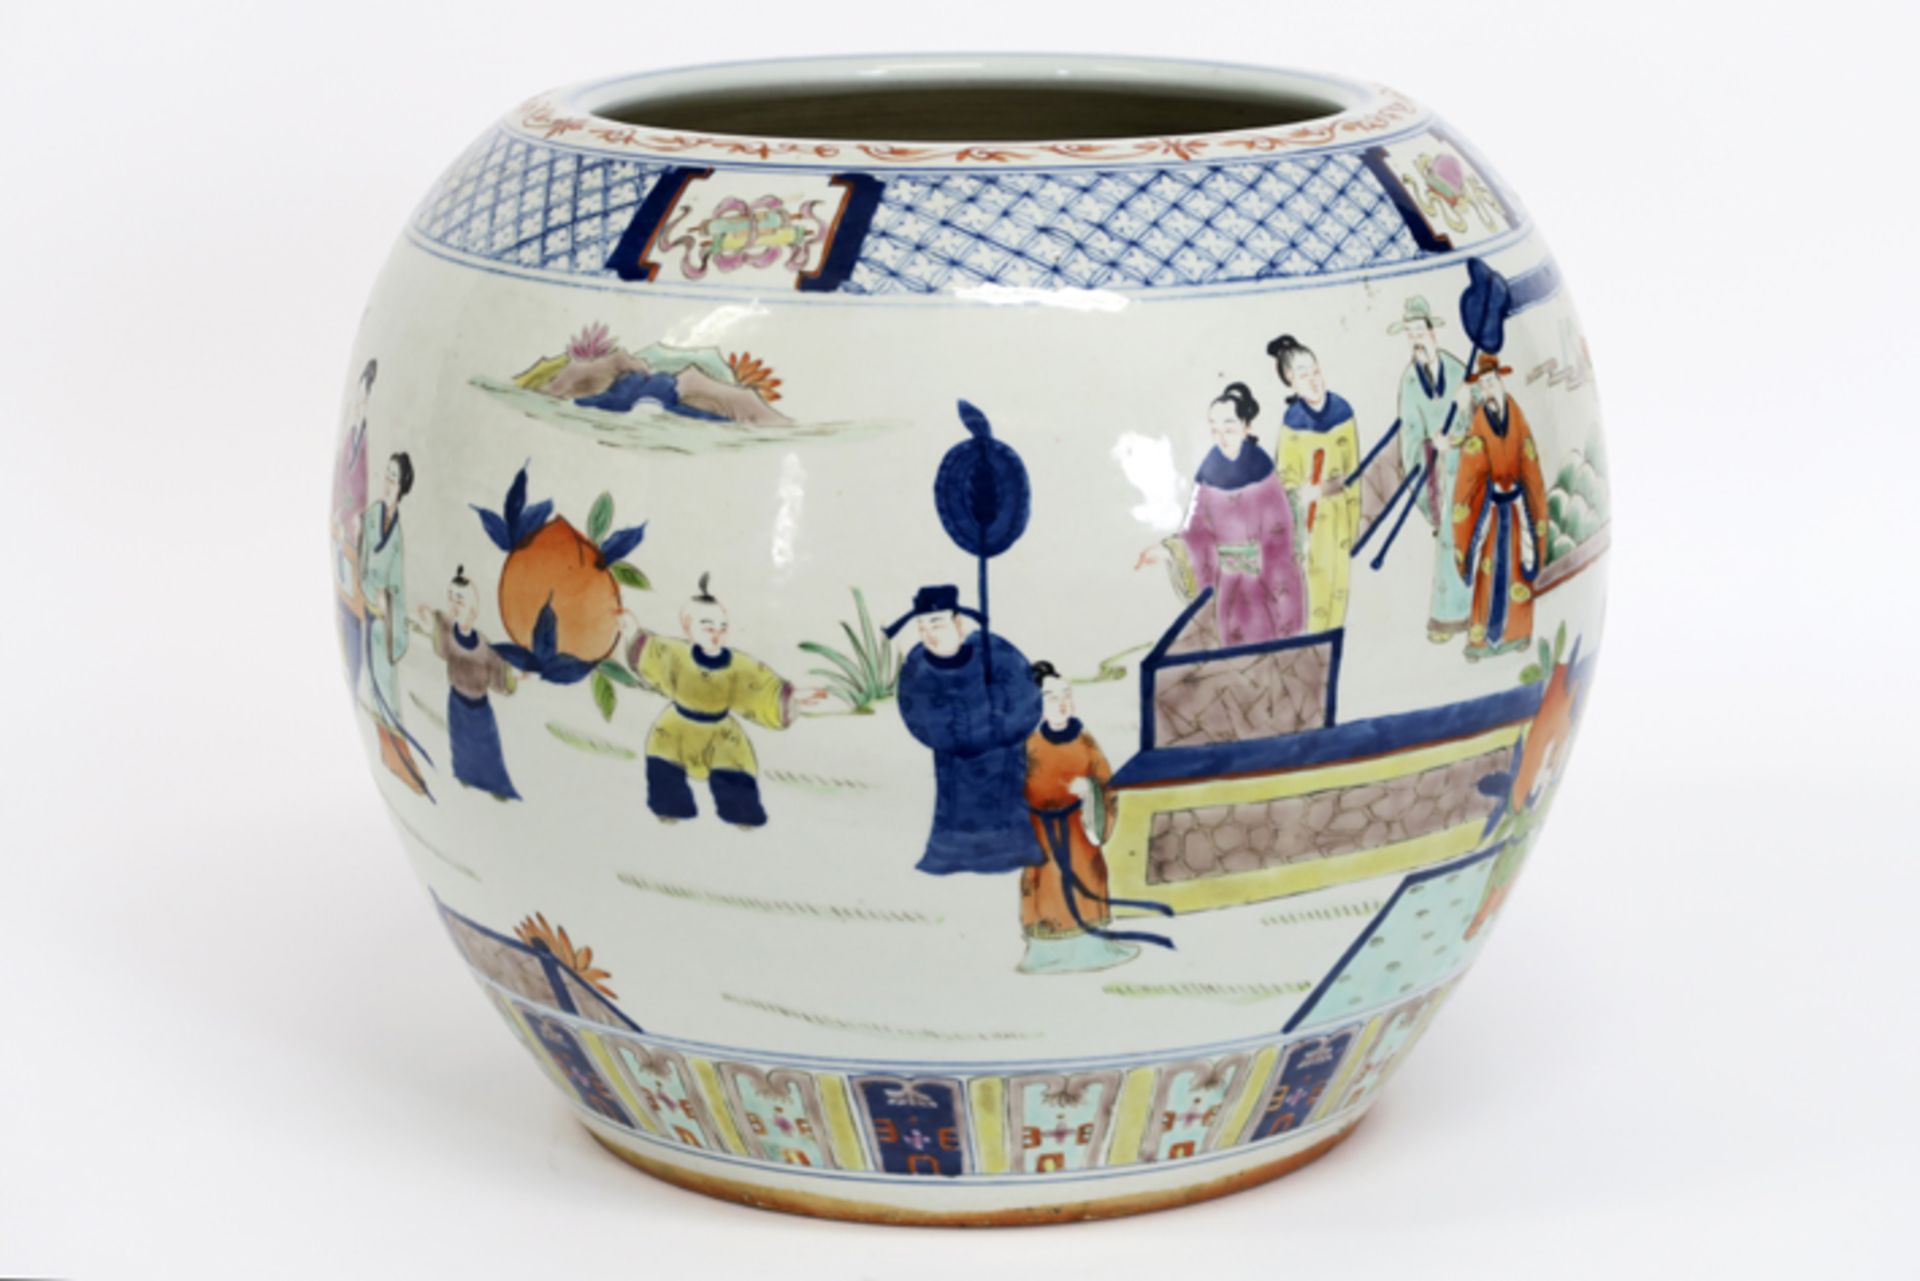 Chinese jardinier in porcelain with a polychrome figures decor - - Vrij grote [...] - Image 2 of 6